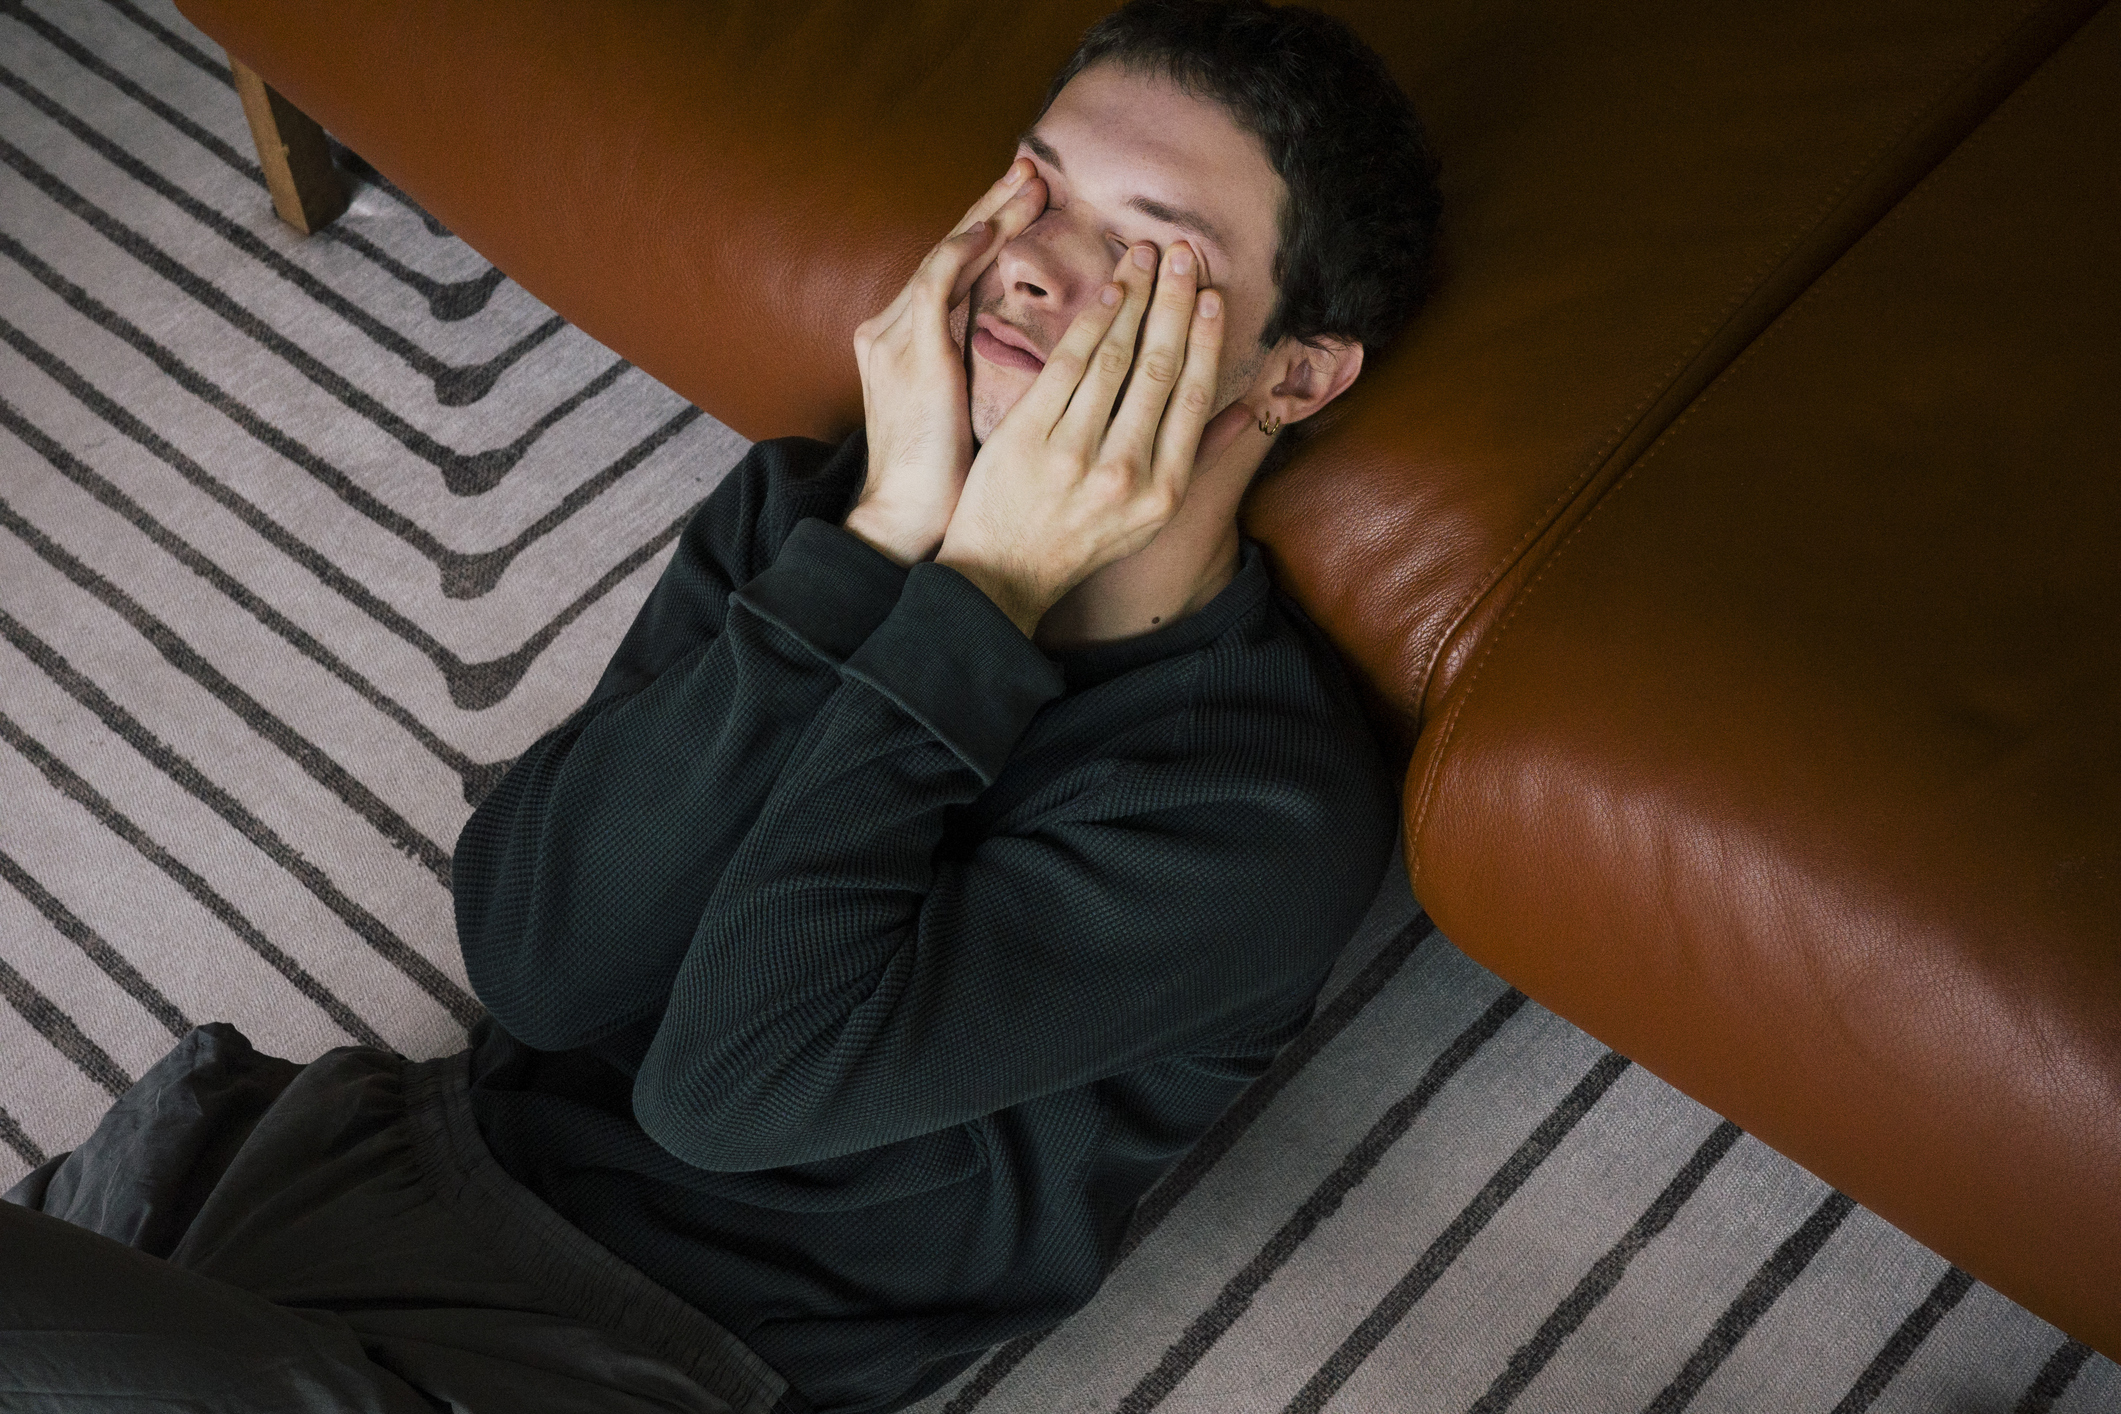 A person wearing a sweater sits on the floor with hands covering the face, leaning against a brown sofa on a striped carpet